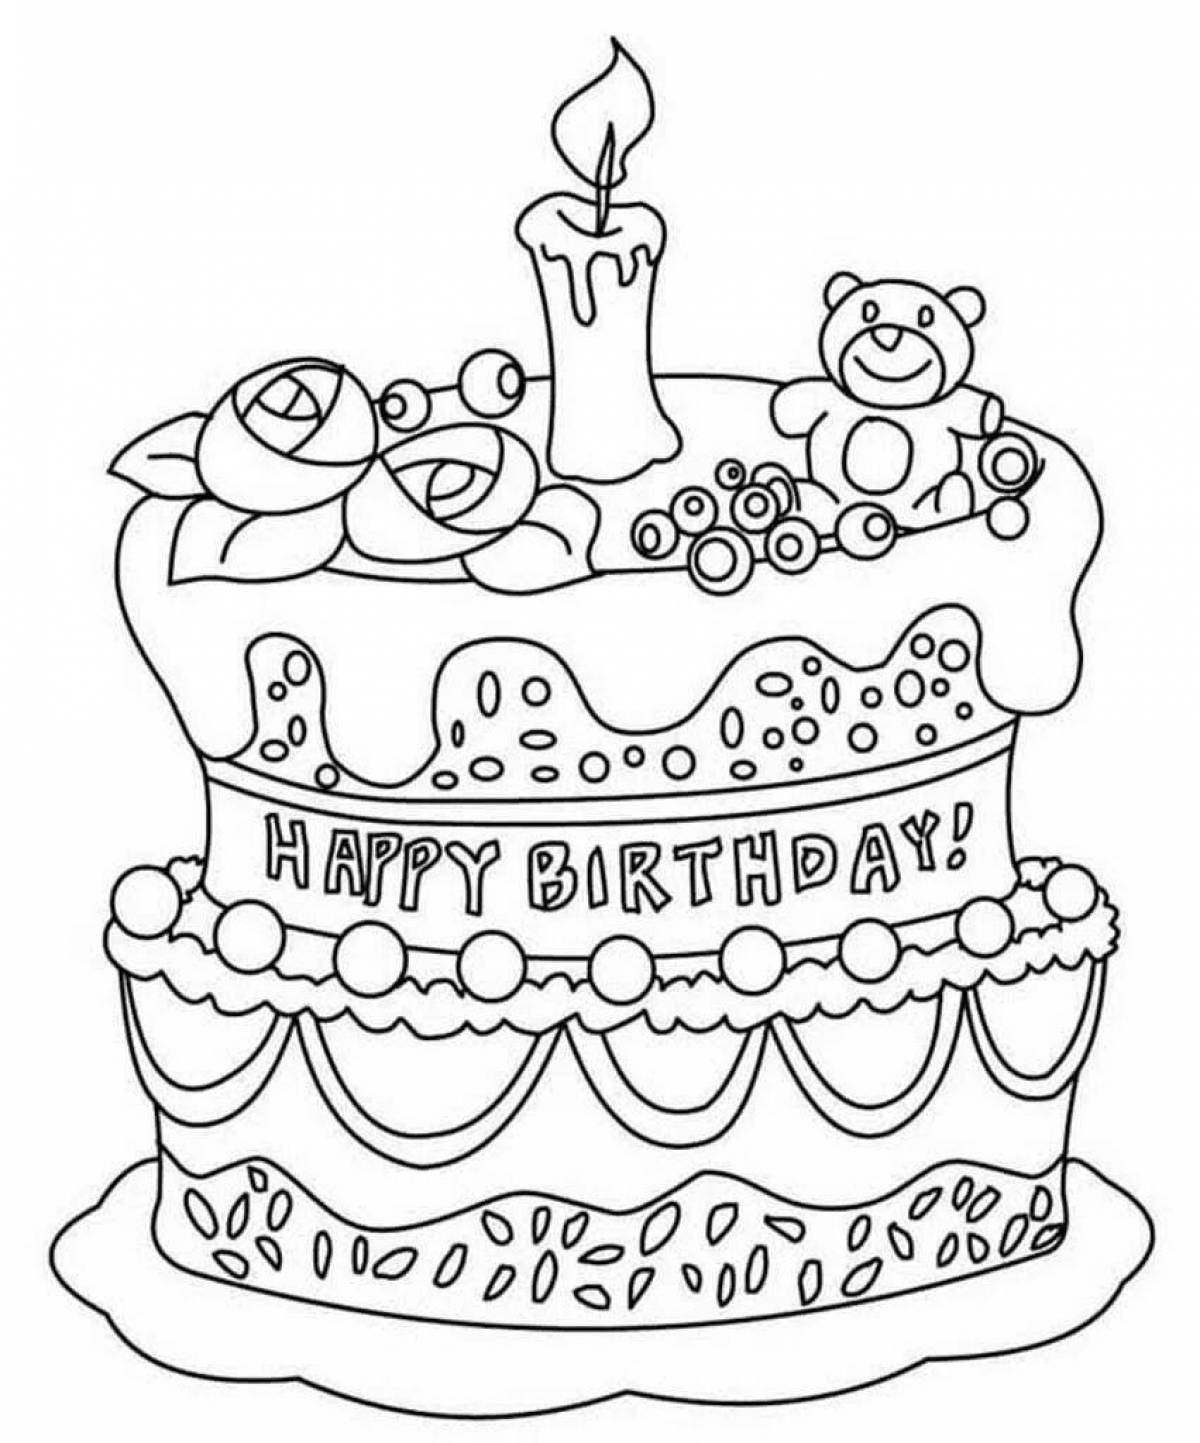 10 year birthday live coloring book